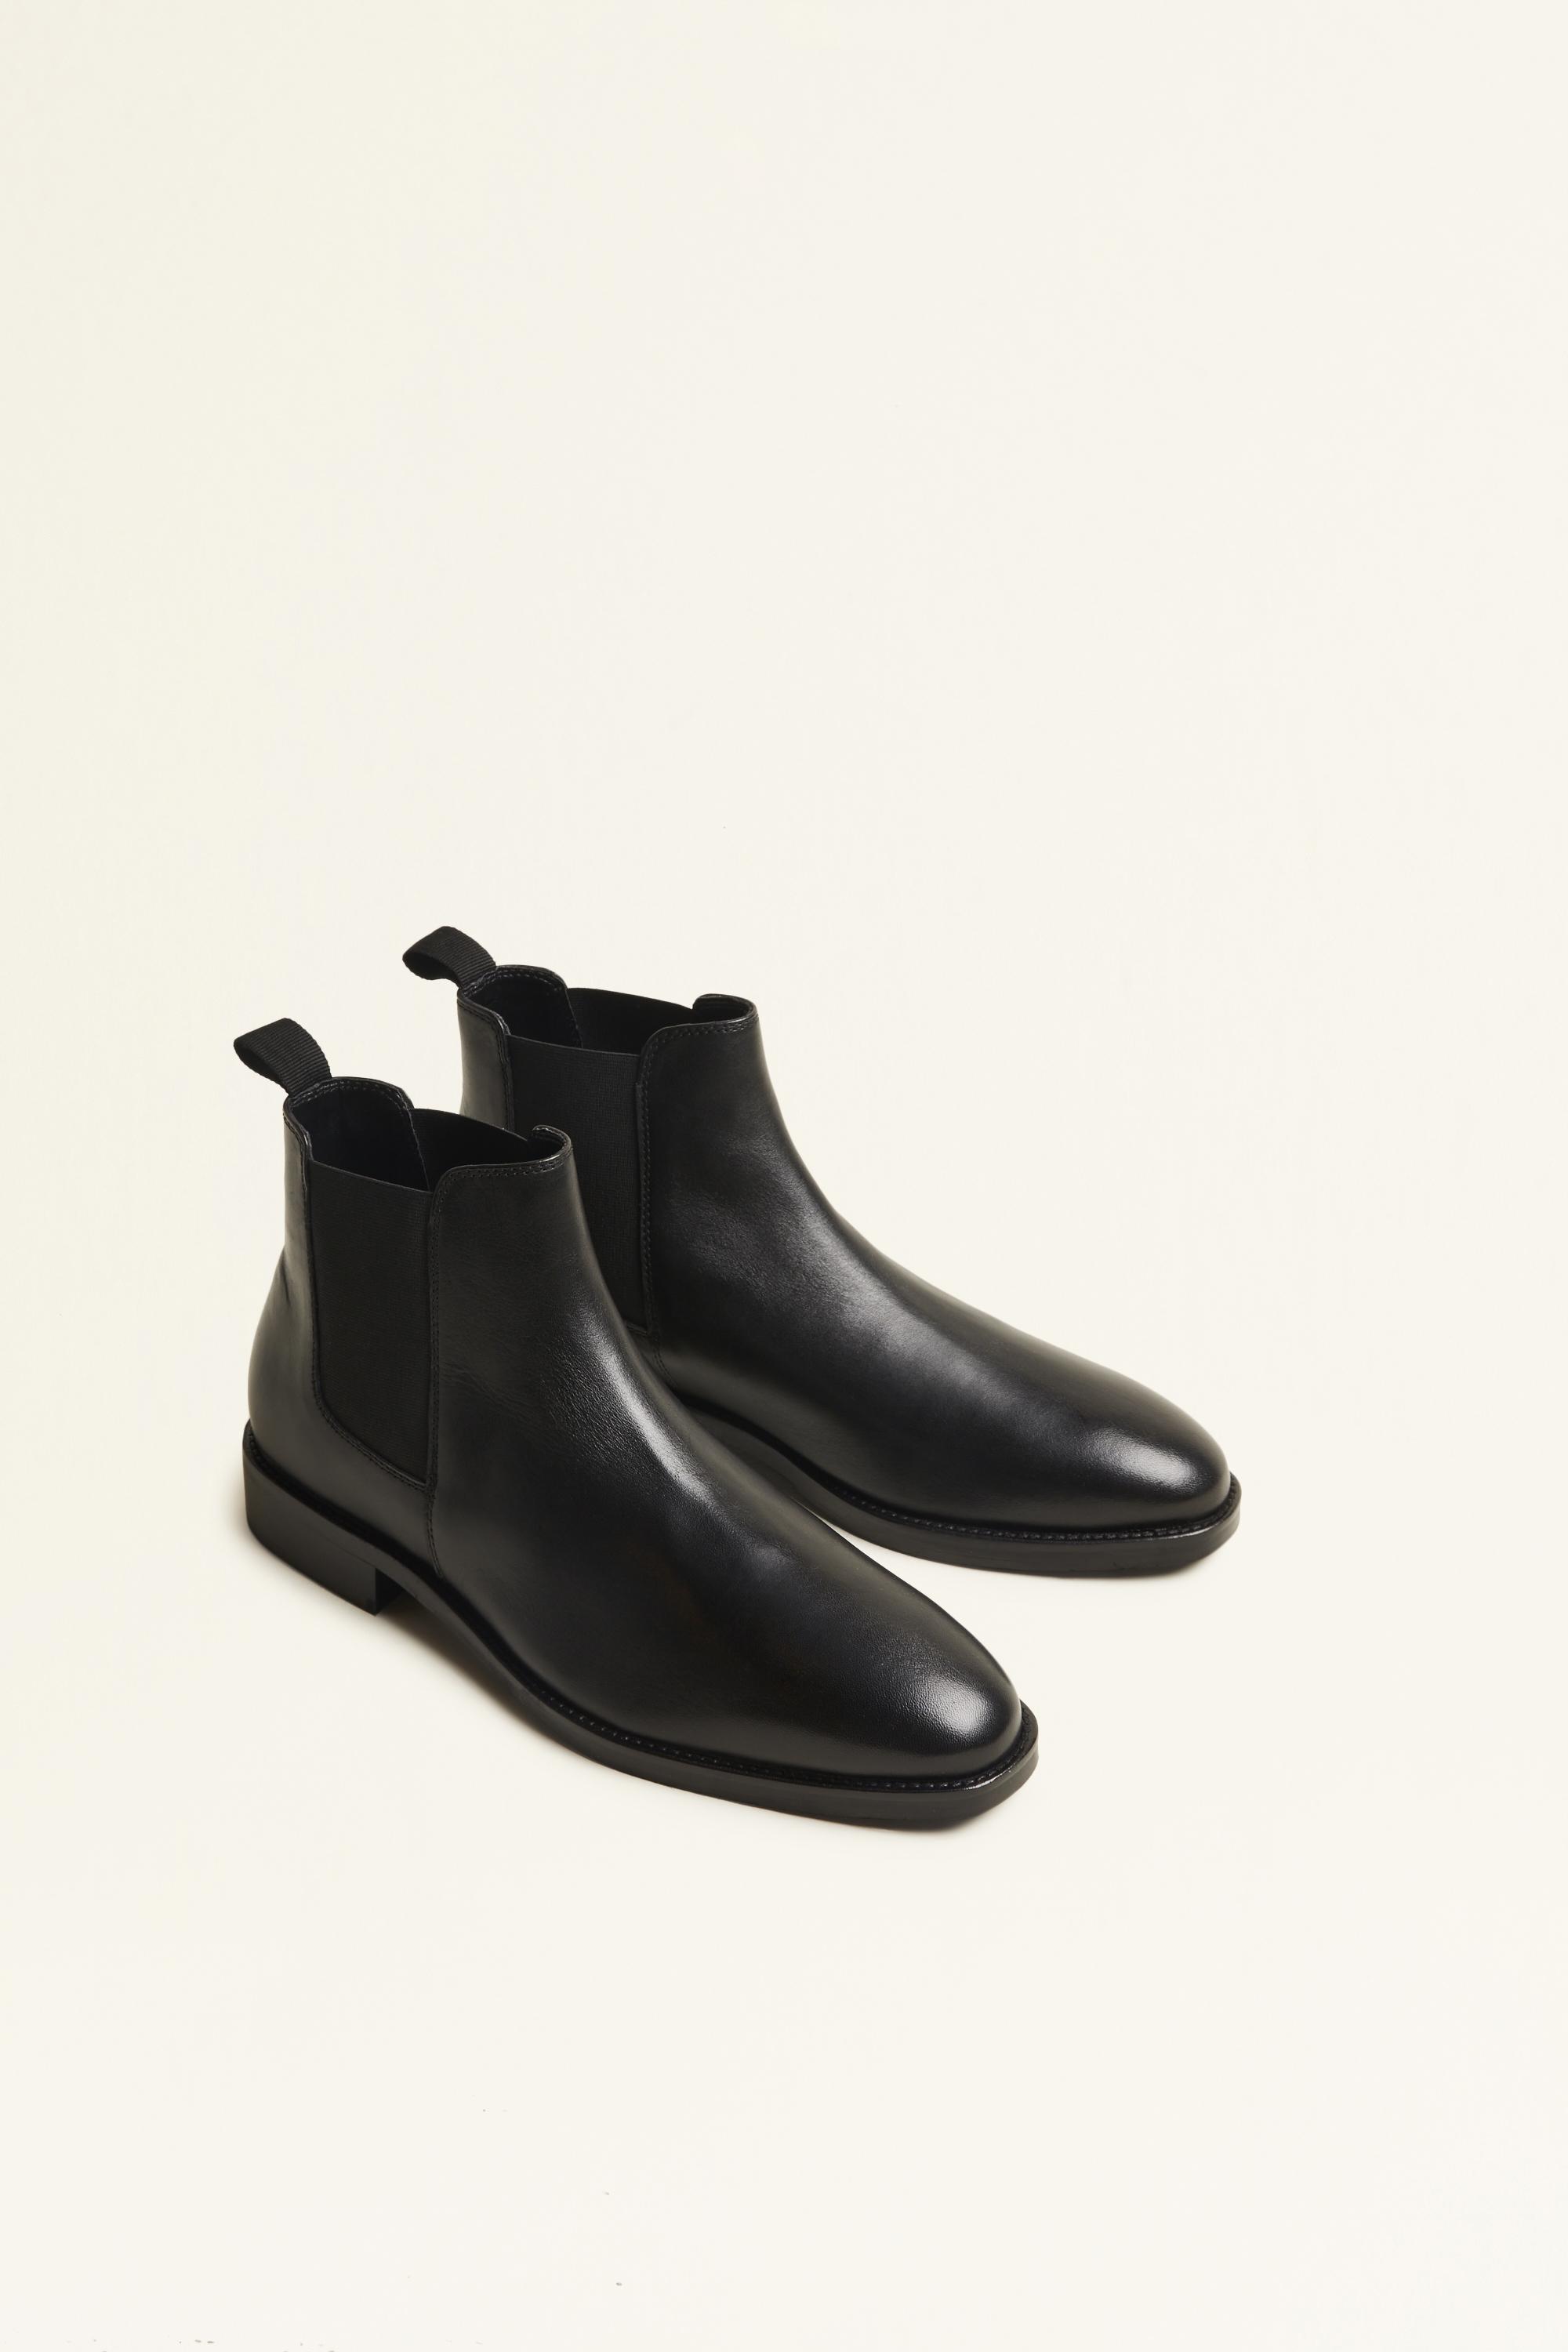 Moss London Leather Seaford Black Chelsea Boot for Men - Lyst